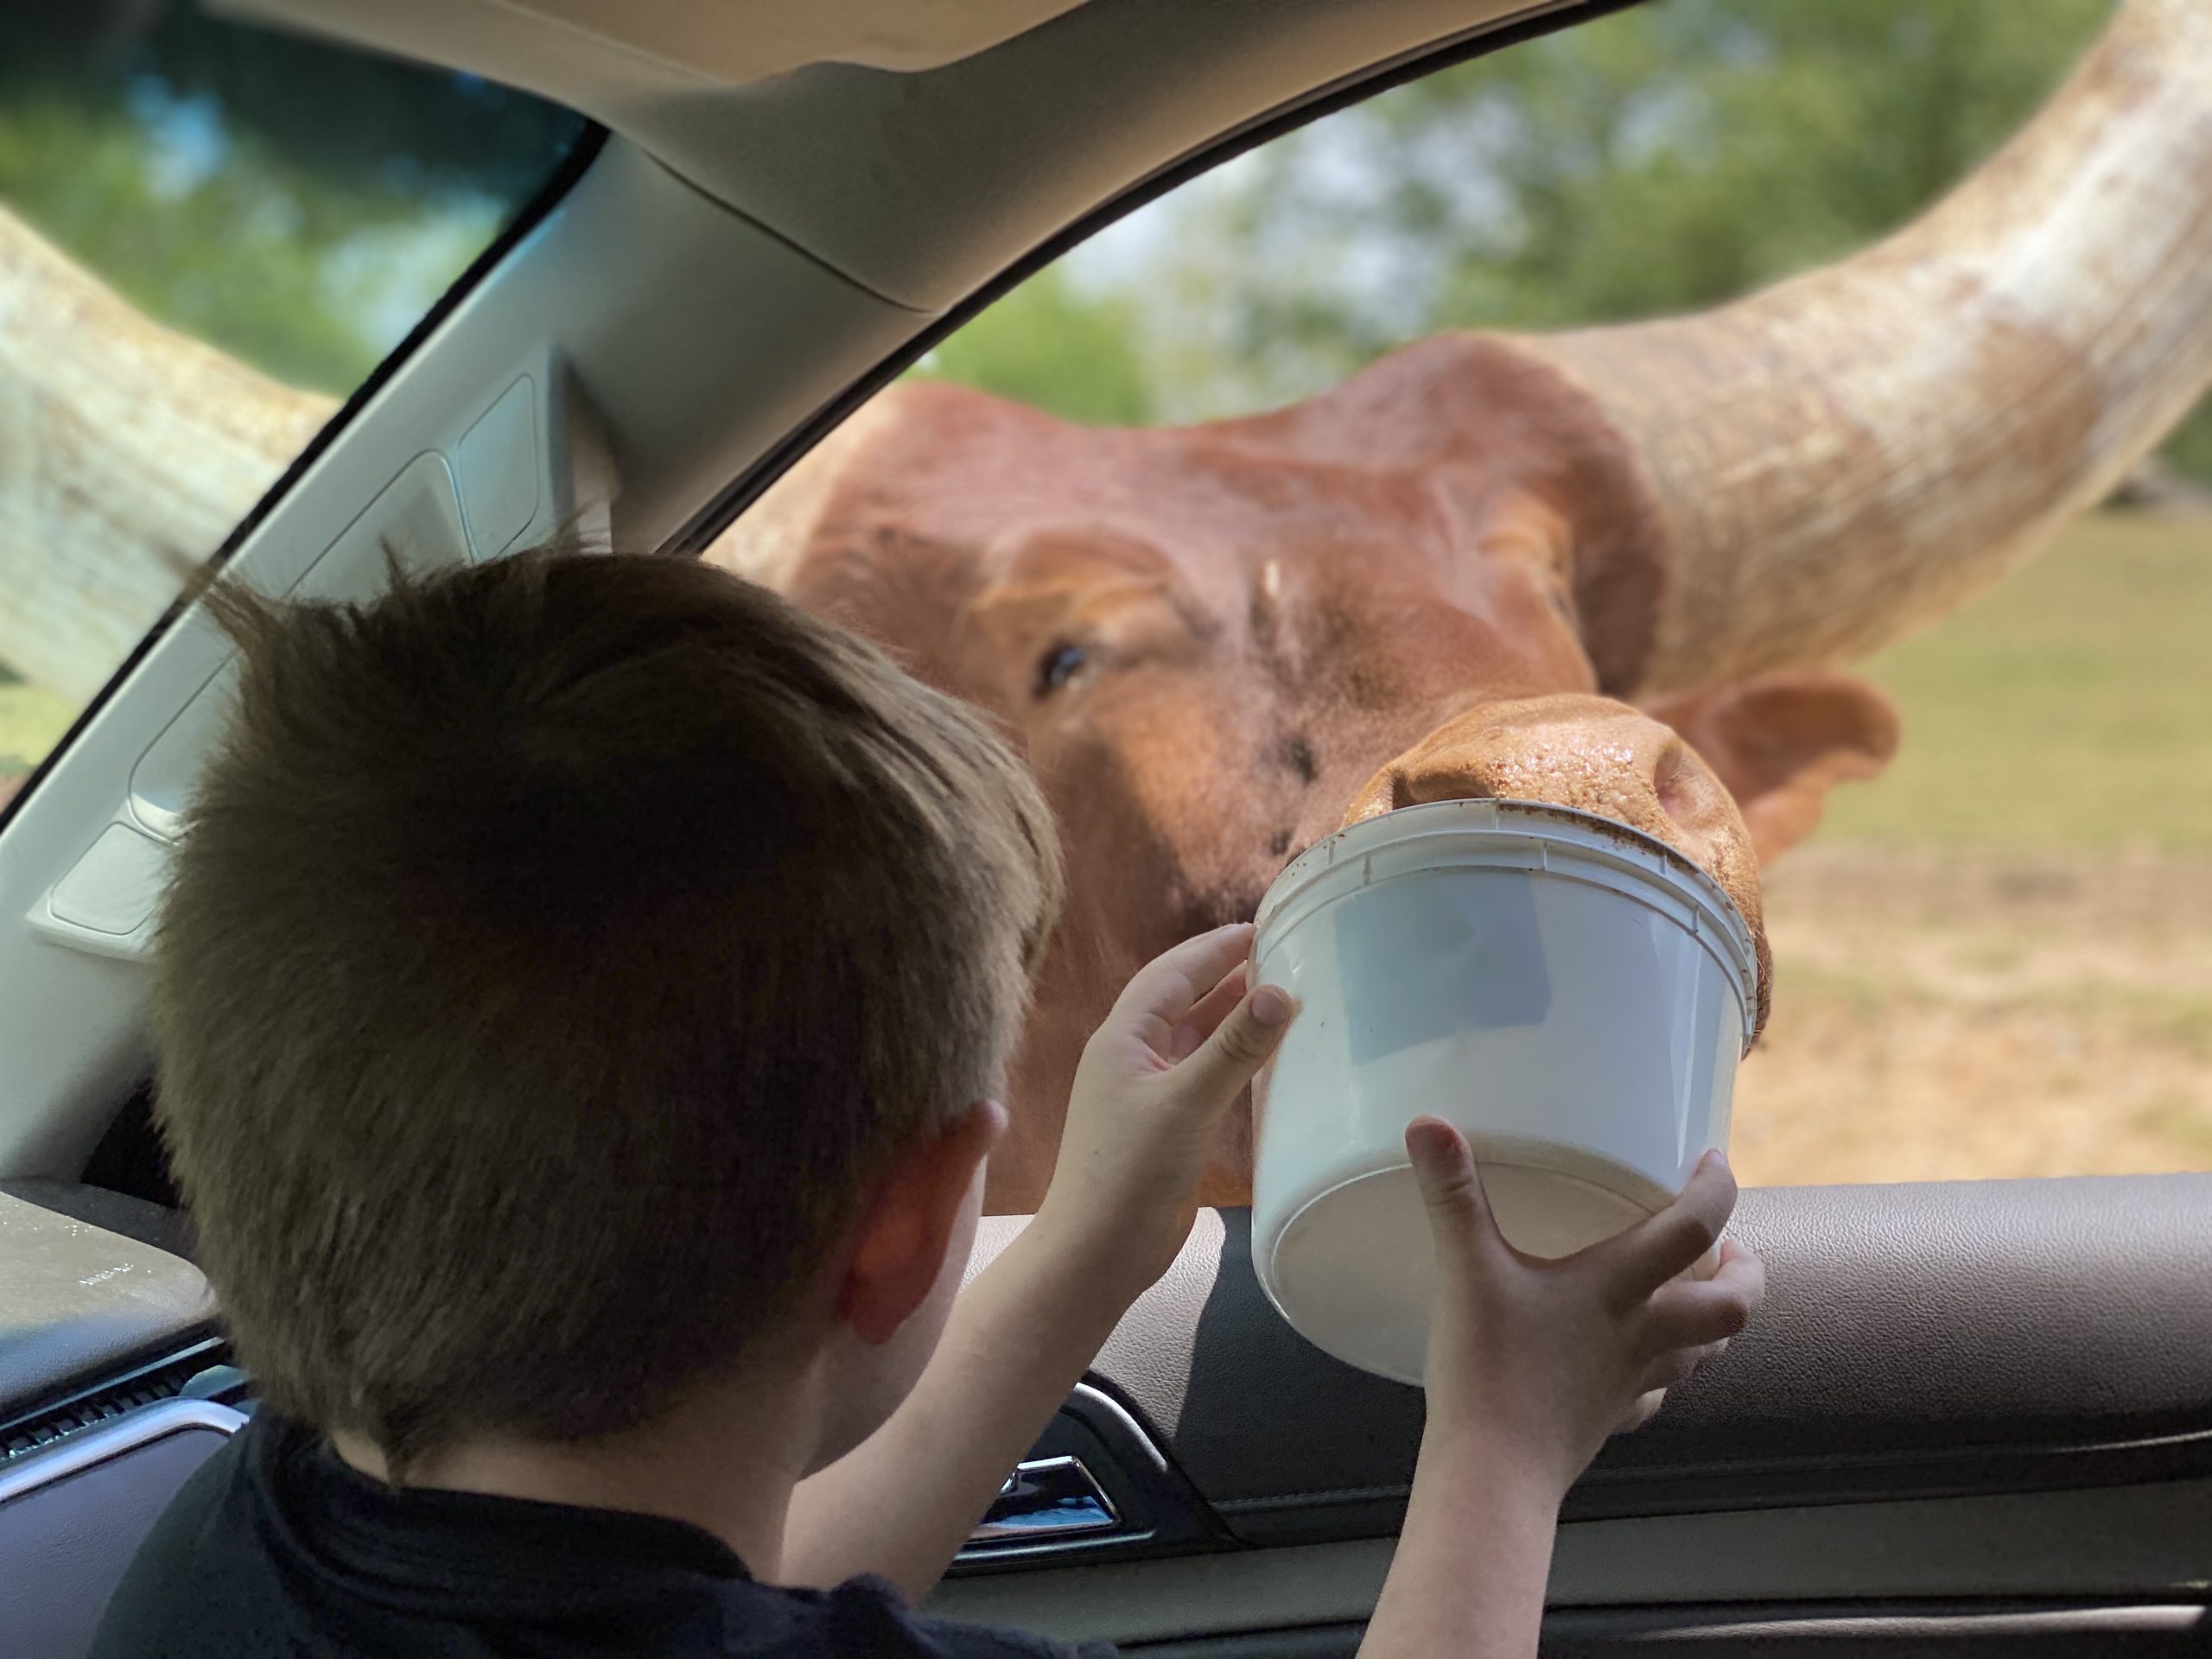 Lazy 5 Ranch - Drive Through Zoo in Mooresville NC - Things to Do With Kids- Day Trips and Family Travel in North Carolina feed animals